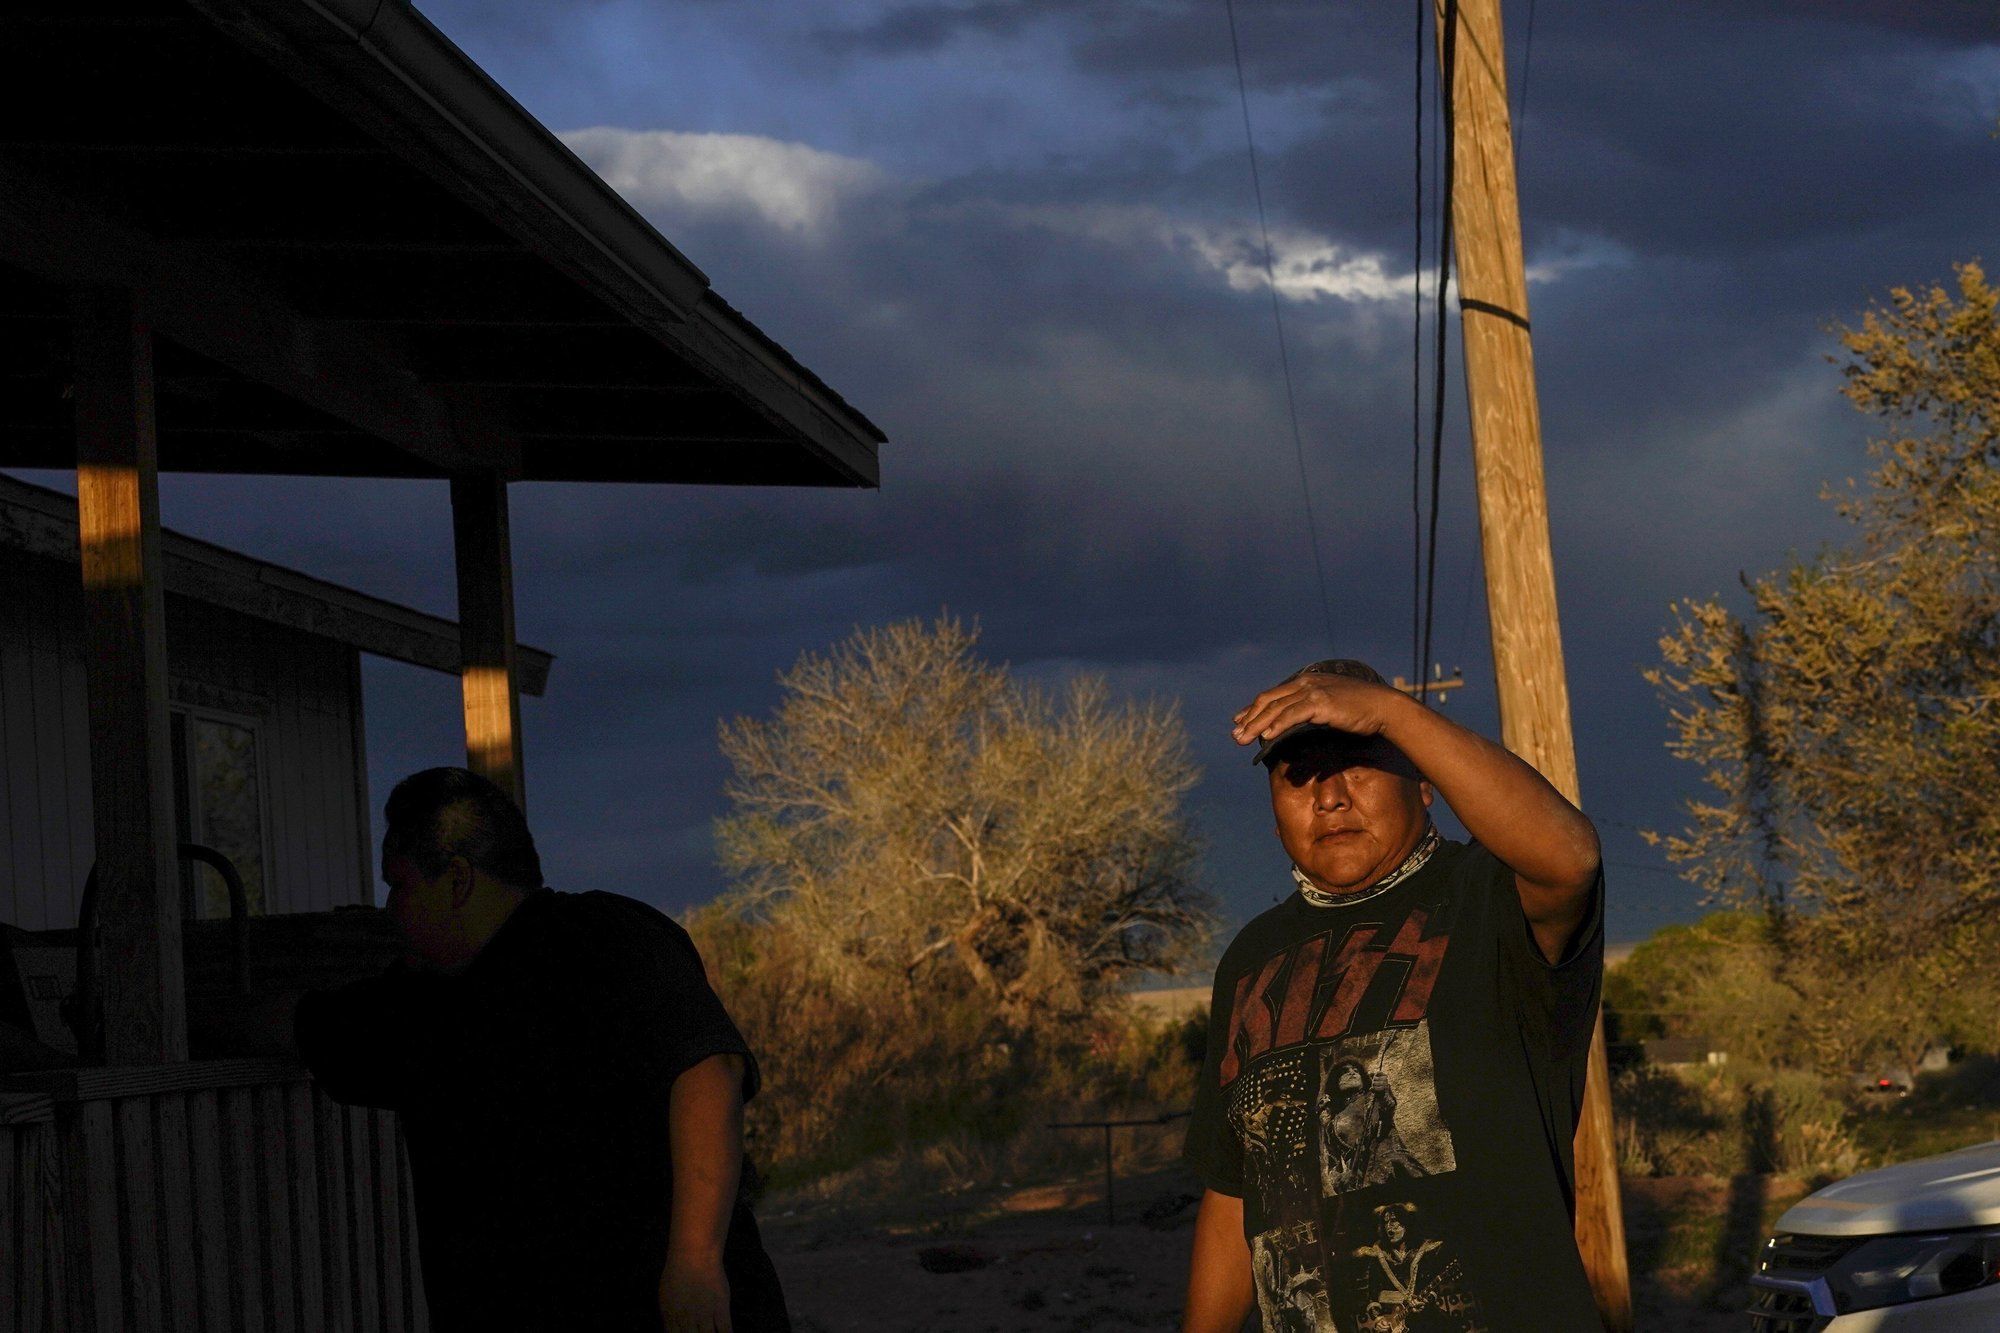 Eugene Dinehdeal shields his face from the setting sun on the Dinehdeal family compound in Tuba City, Ariz., on the Navajo reservation on April 20, 2020. The Navajo reservation has some of the highest rates of coronavirus in the country. If Navajos are susceptible to the virus' spread in part because they are so closely knit, that's also how many believe they will beat it. Image by AP Photo/Carolyn Kaster. United States, 2020.